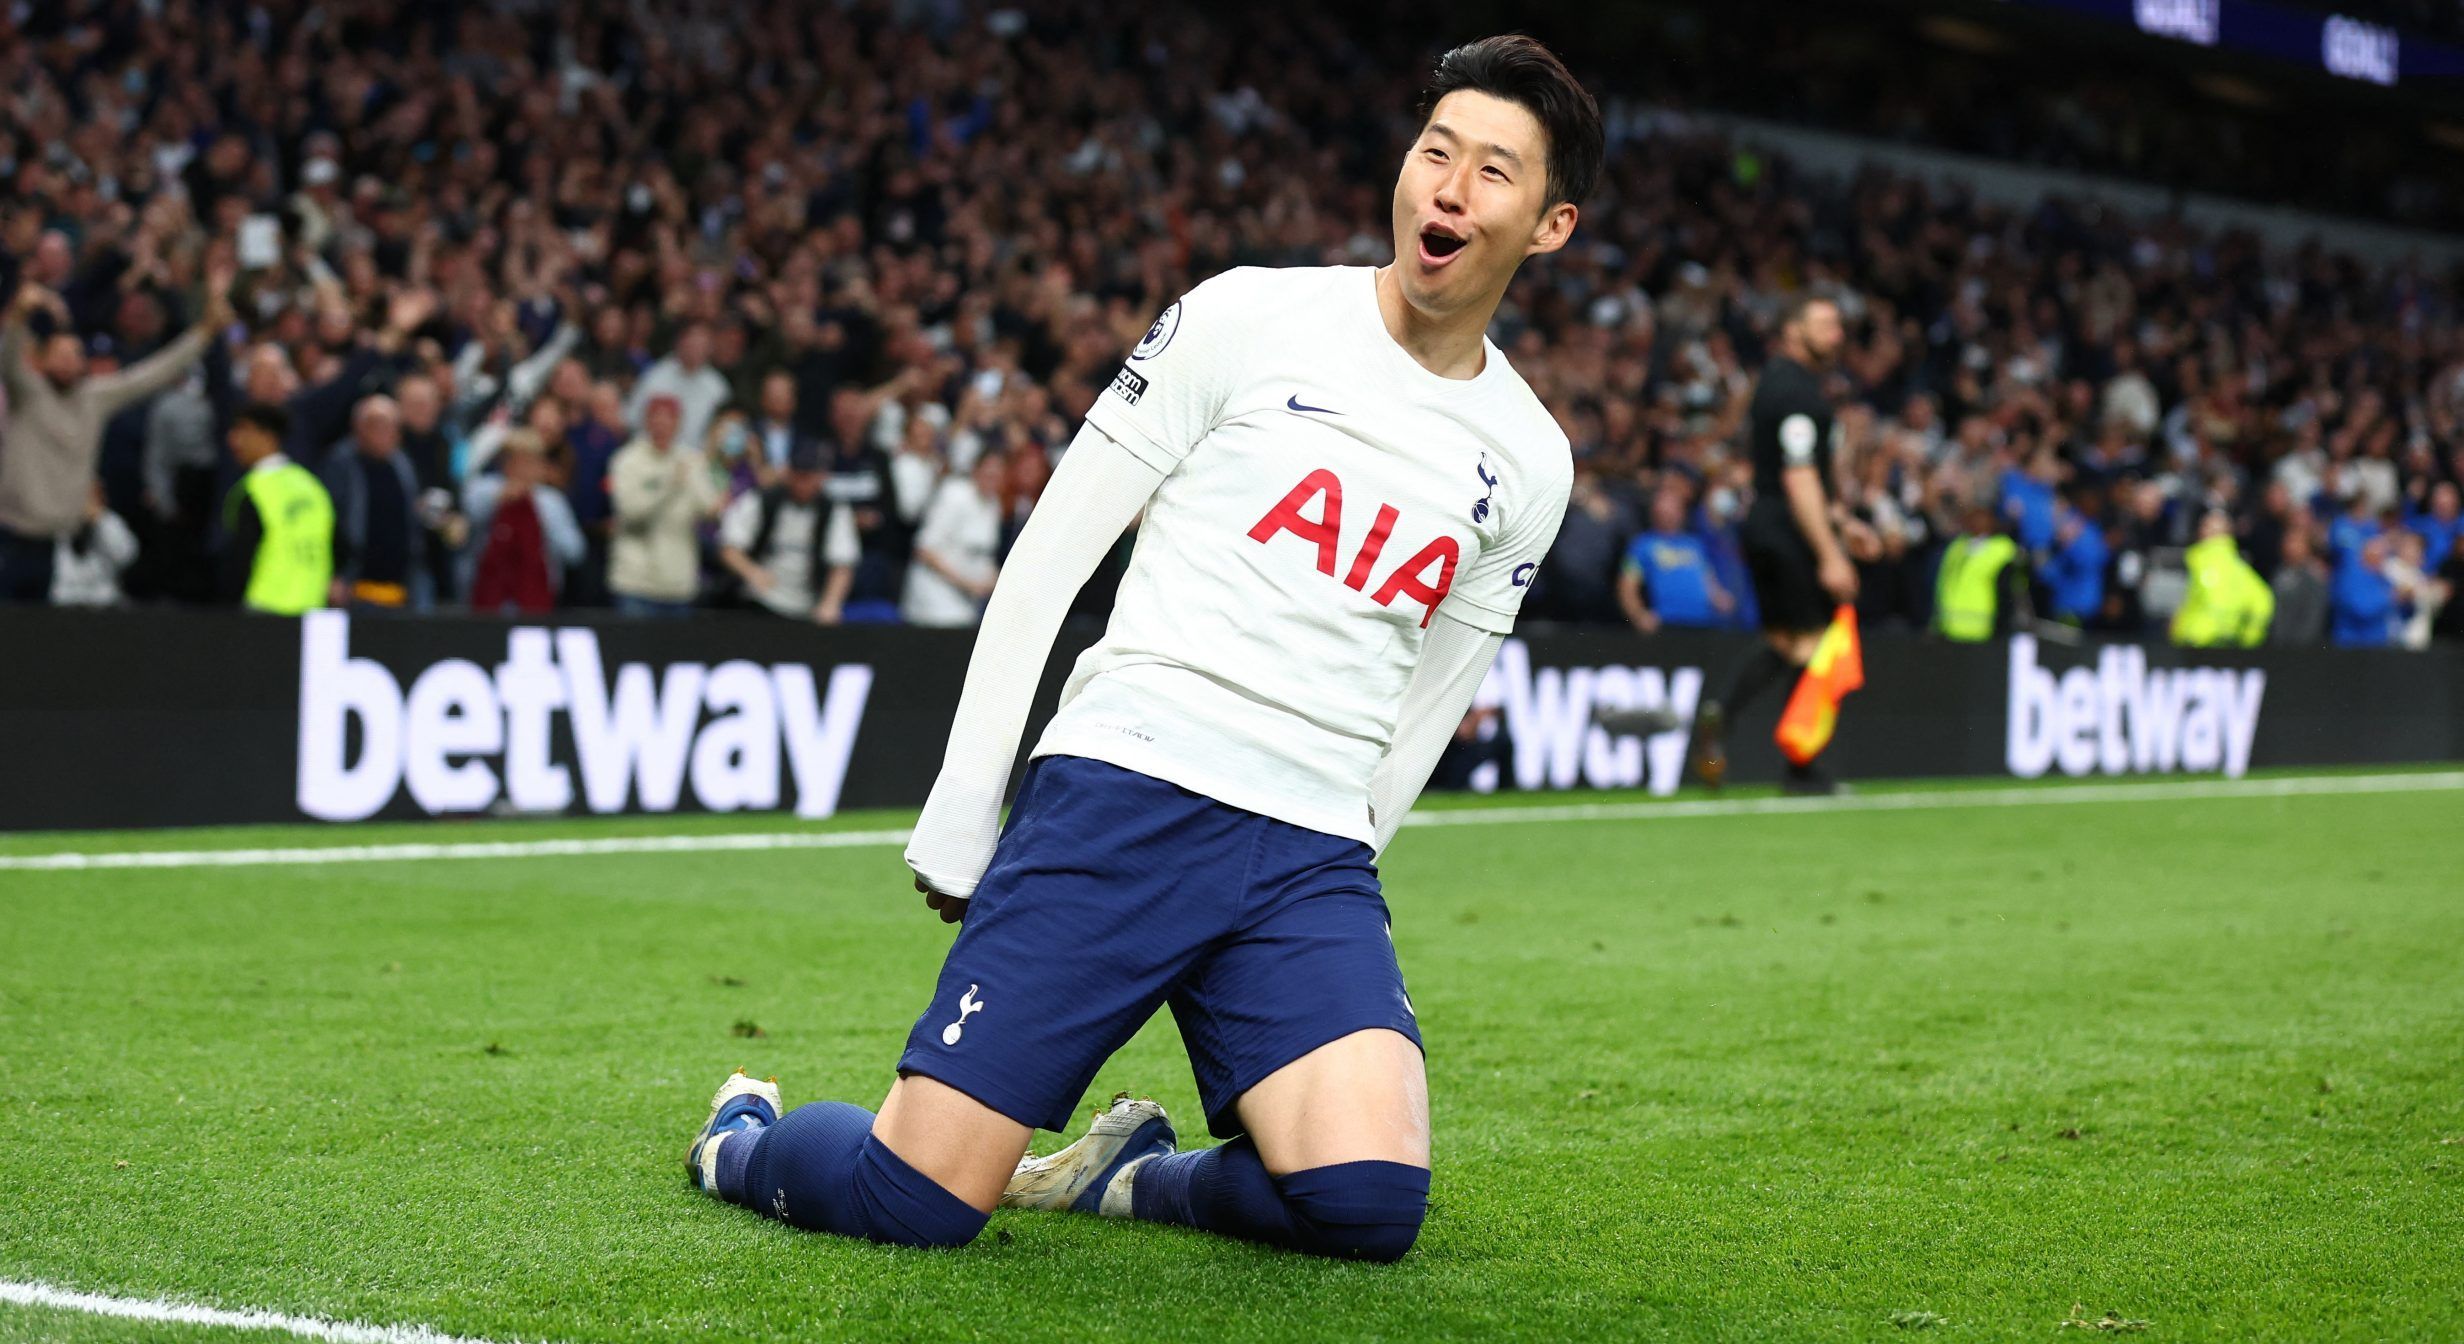 Spurs winger Heung-min Son celebrates scoring against Arsenal in the Premier League